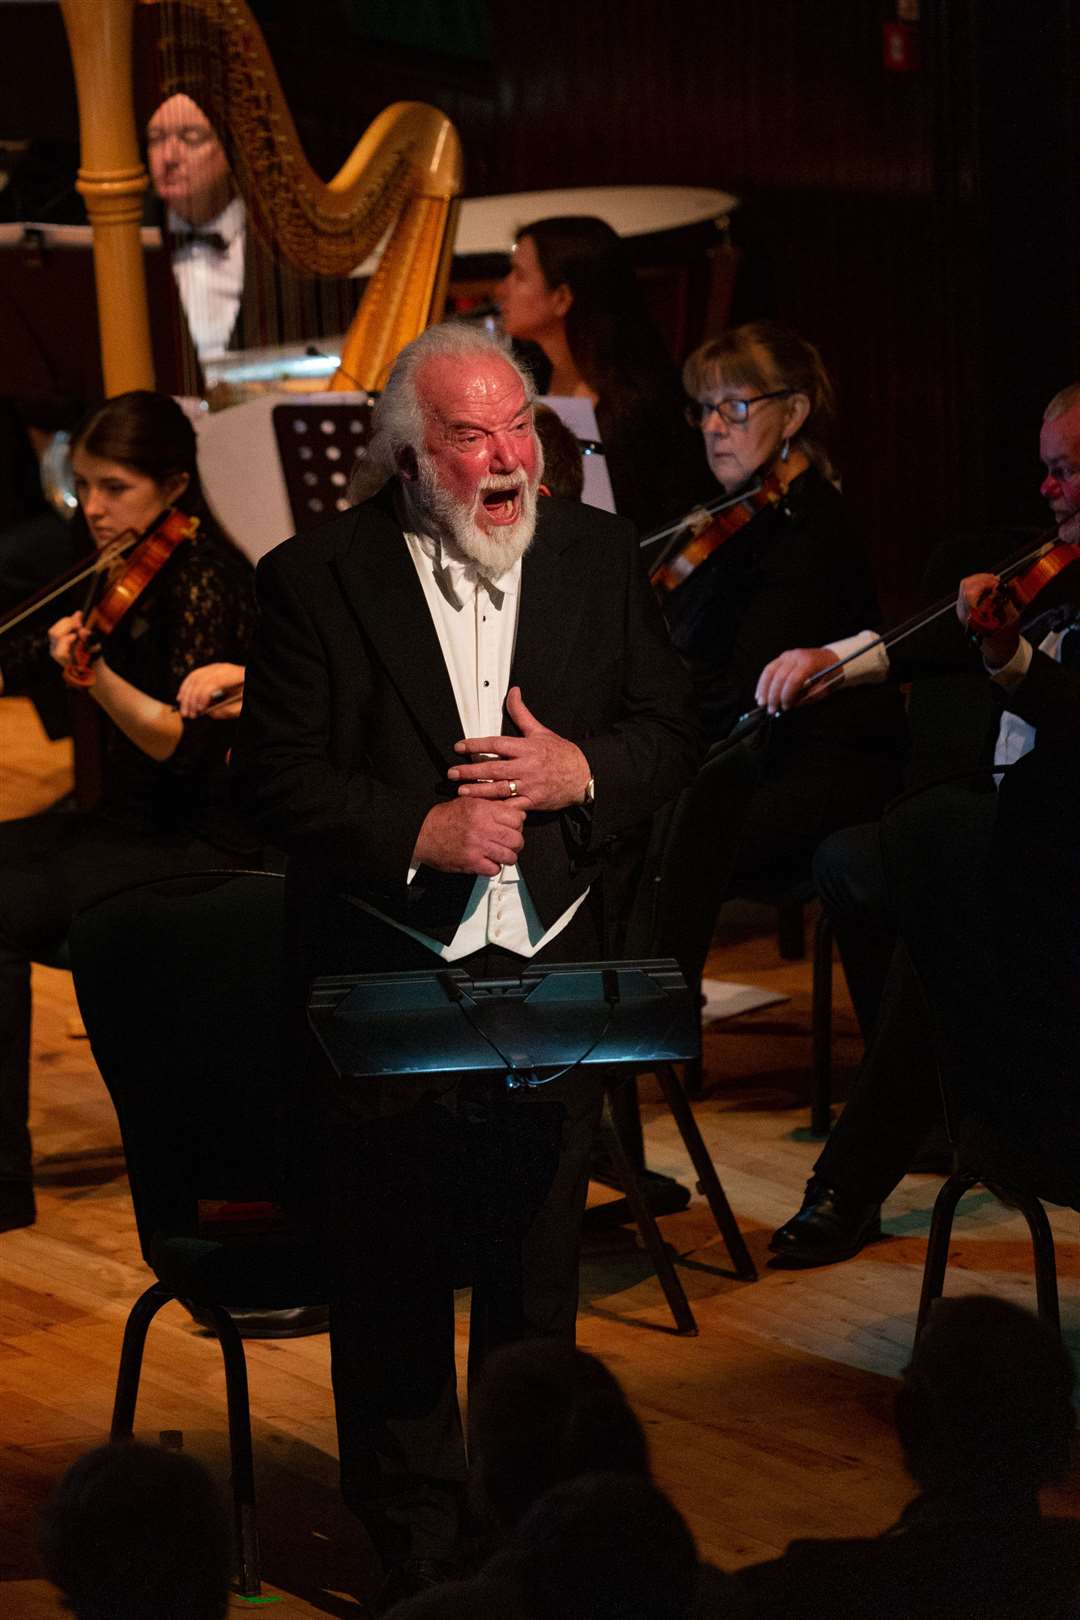 Soloist Sir John Tomlinson guested with the Mahler Players for Tristan Und Isolde. Picture: Sam Leakey